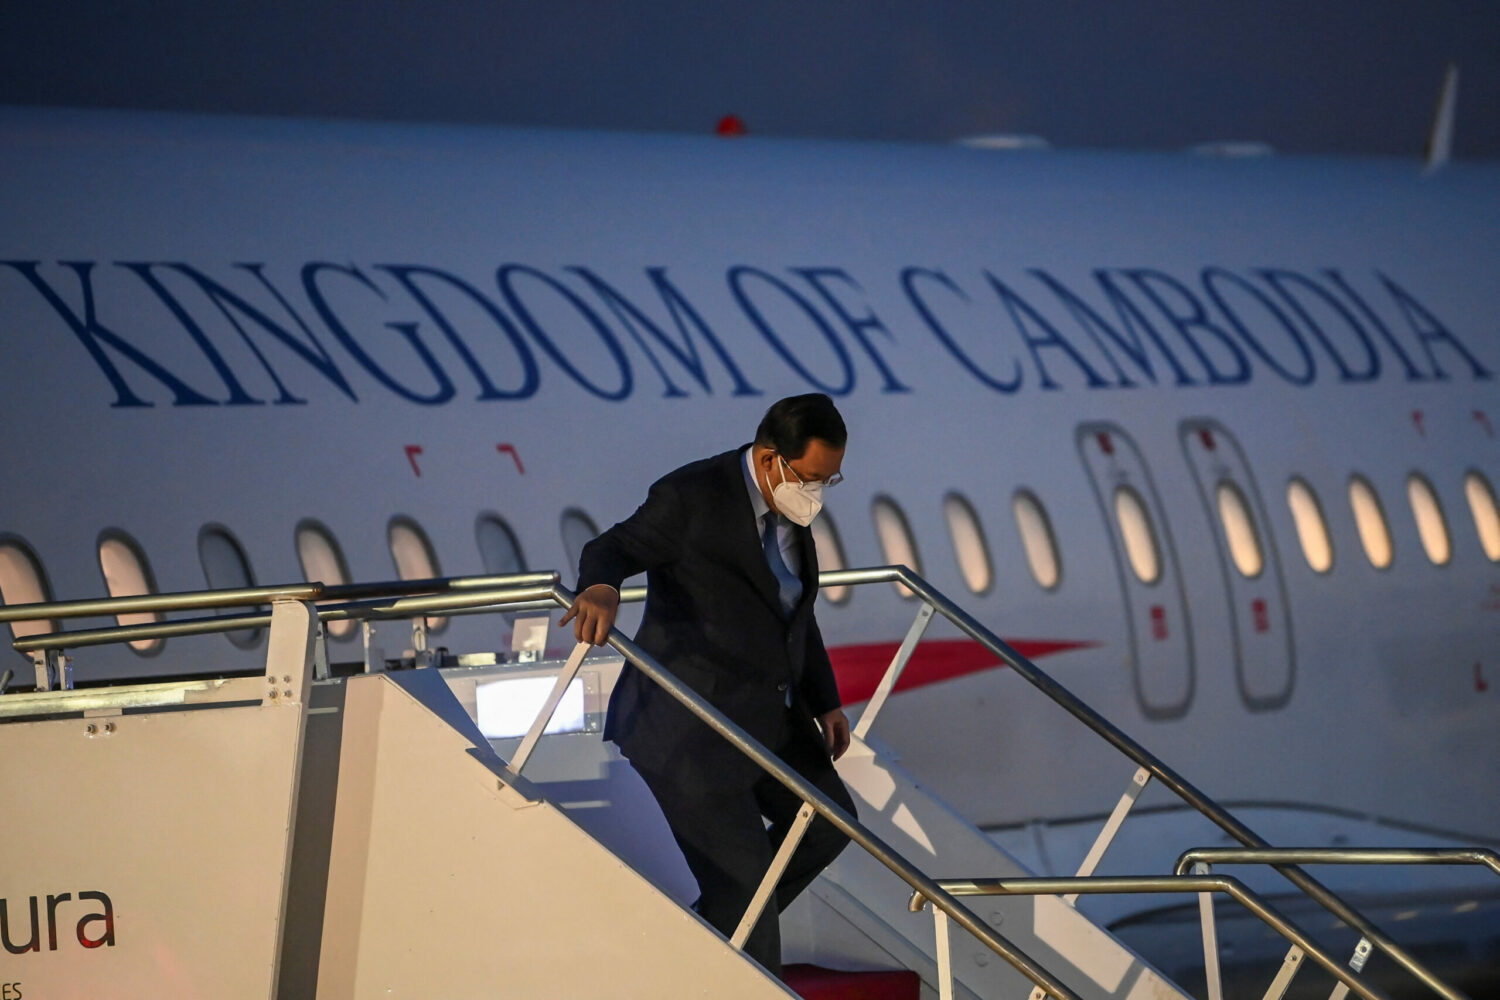 Prime Minister Hun Sen walks down the stairs of the presidential plane on his arrival at Ngurah Rai International Airport ahead of the G20 Summit in Bali, Indonesia on November 14, 2022. (G20 Media Center/Reuters)